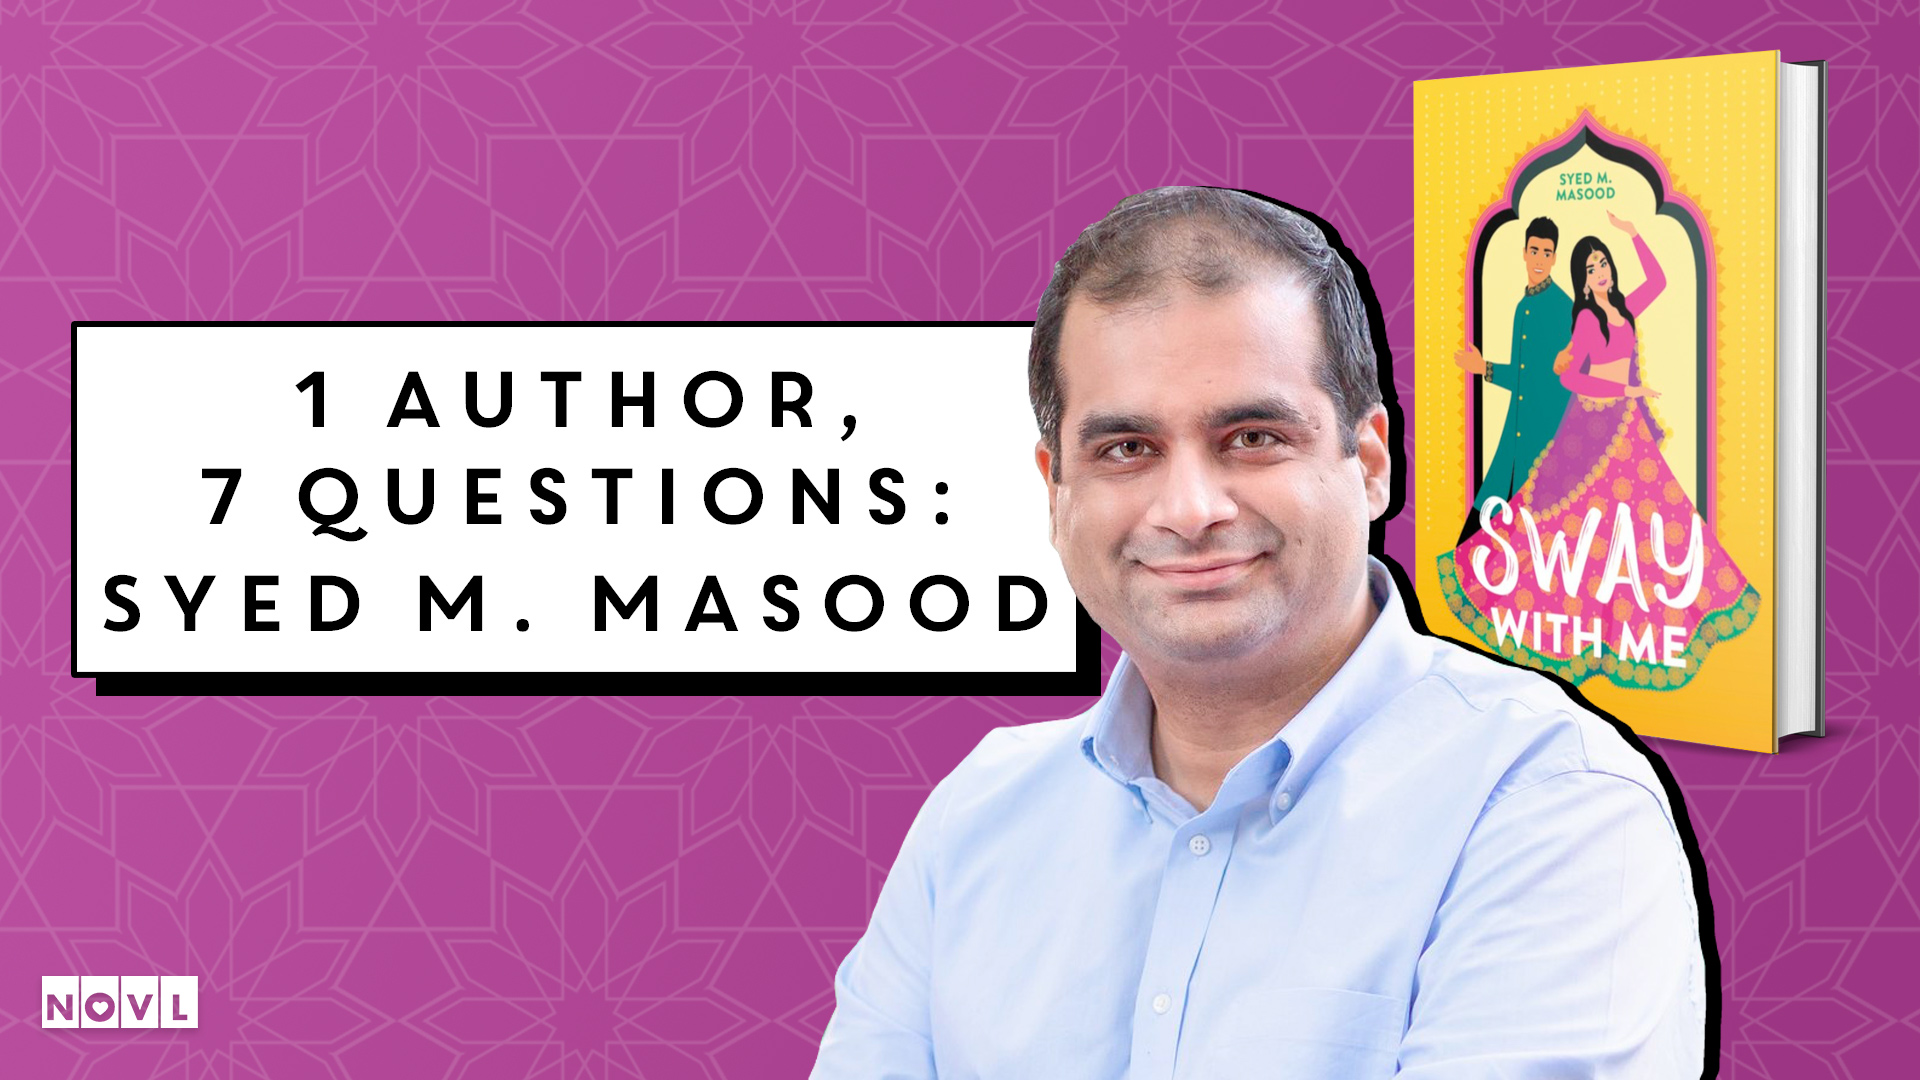 The NOVL Blog, Featured Image for Article: 1 Author, 7 Questions: Syed M. Masood